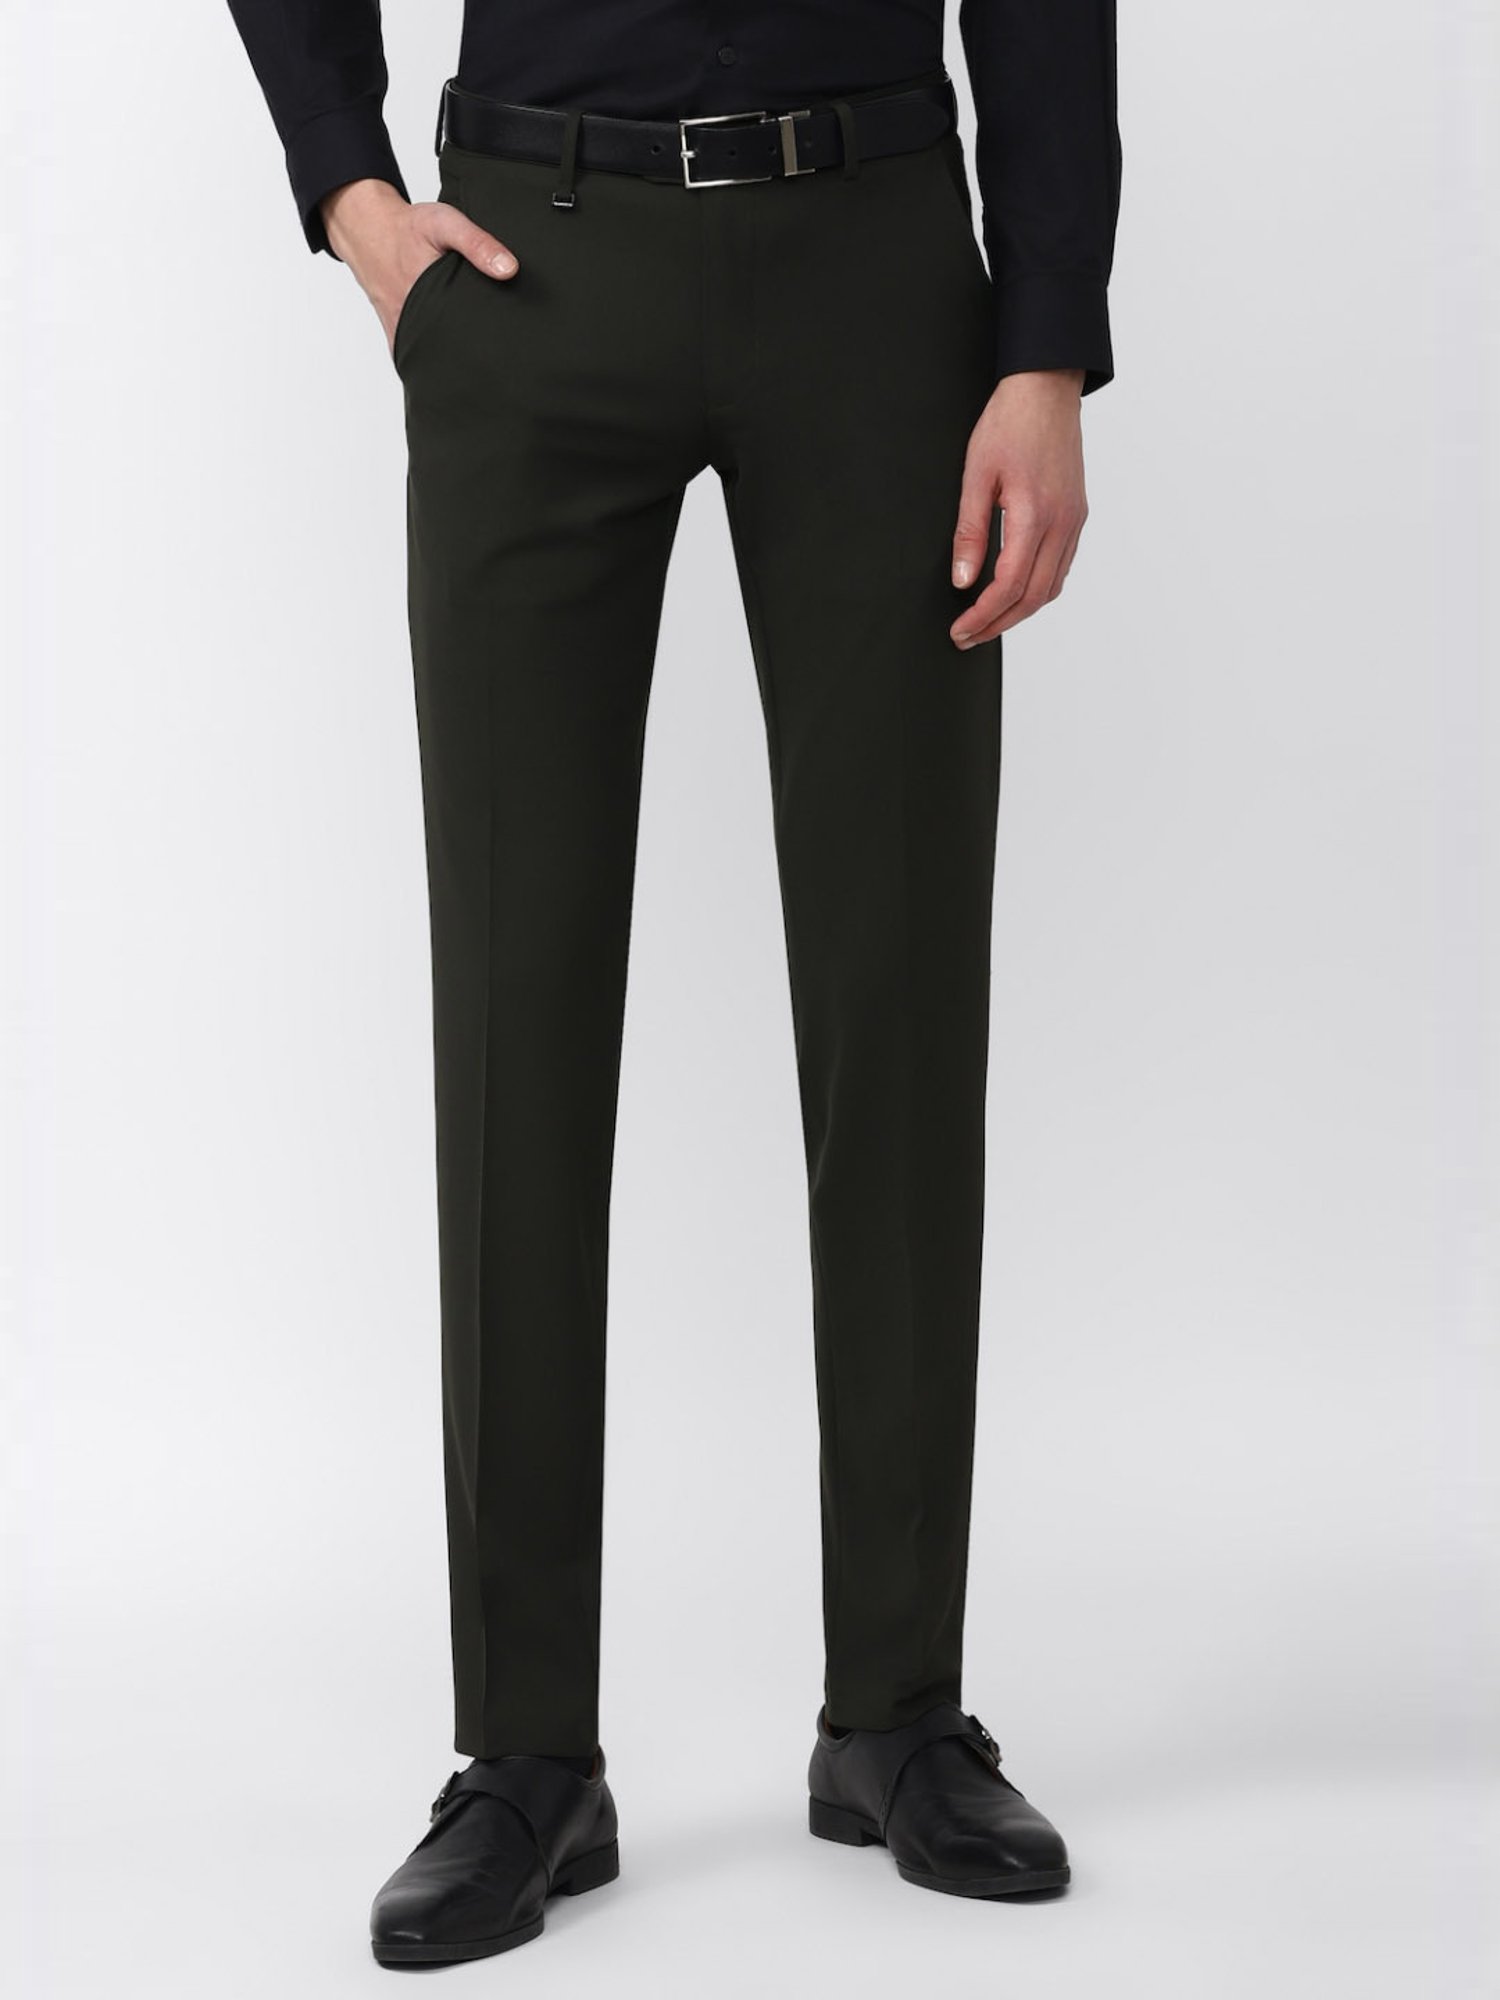 Mens Casual Slim Fit Trouser Grey in Bareilly at best price by Janta  Apparels  Justdial